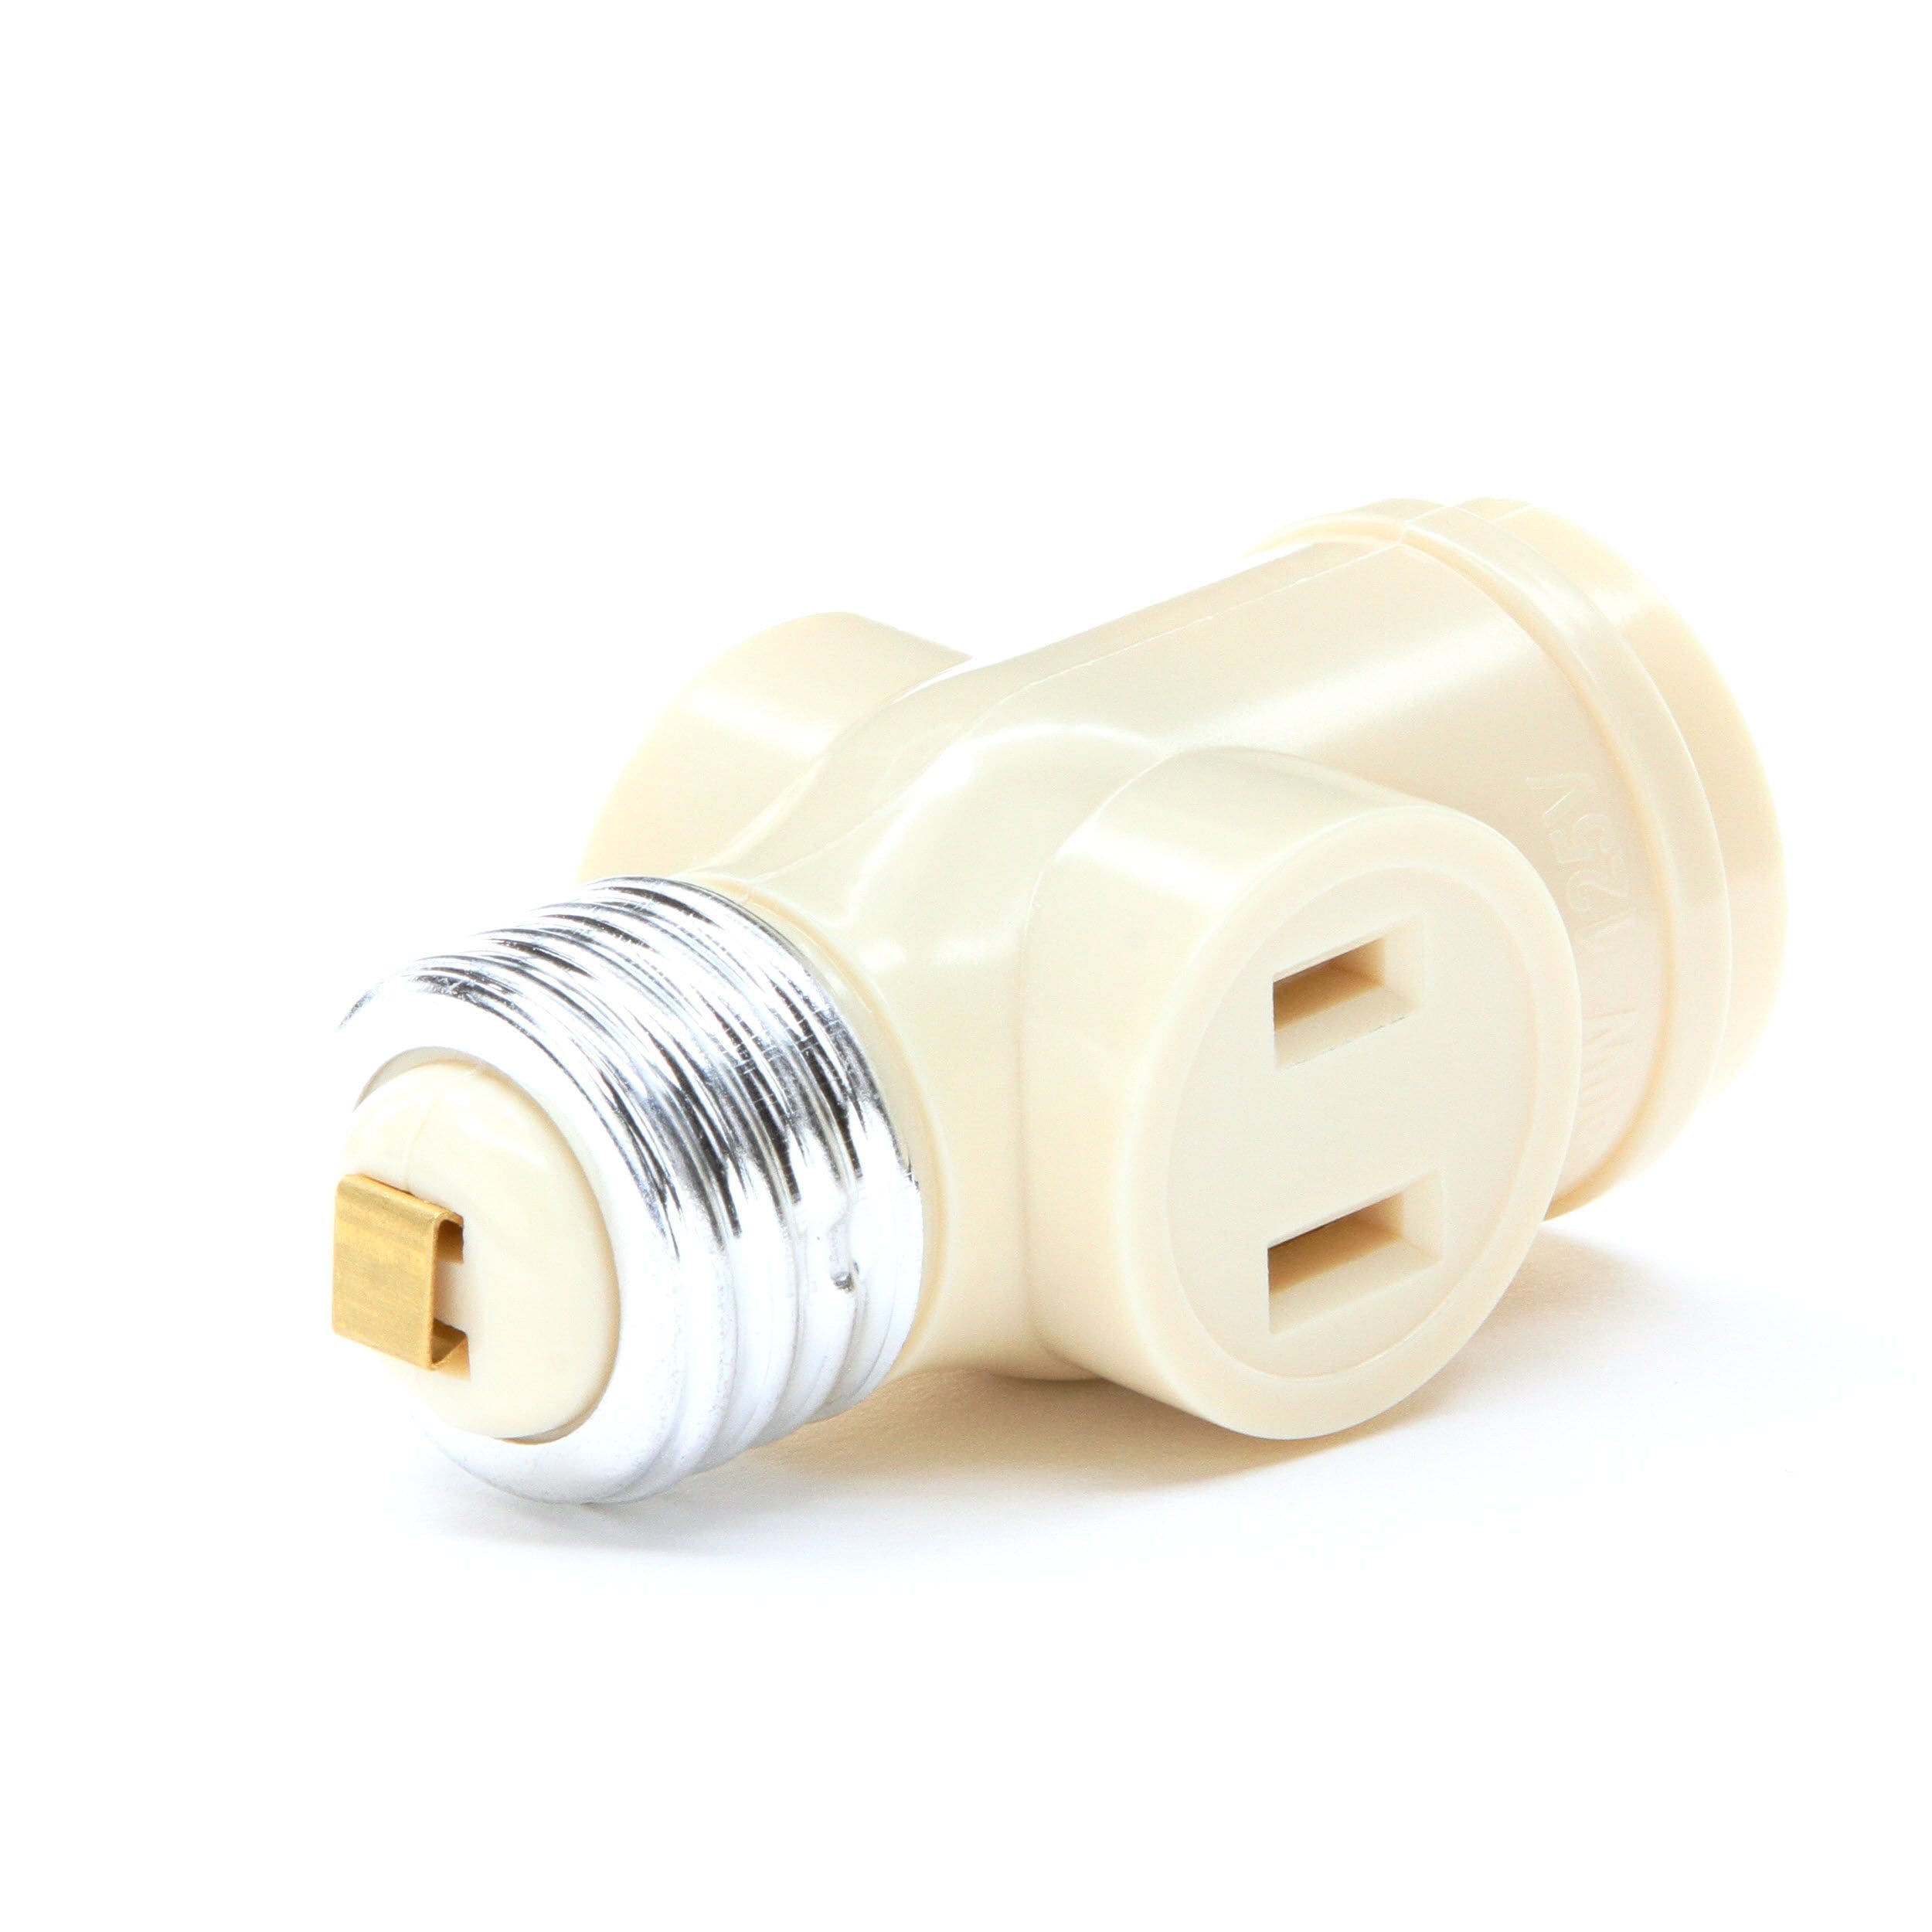 Prong In Screw Details about   E26/E27 Light Socket Outlet 110V Plug Converter Rated 110W Or 1A 